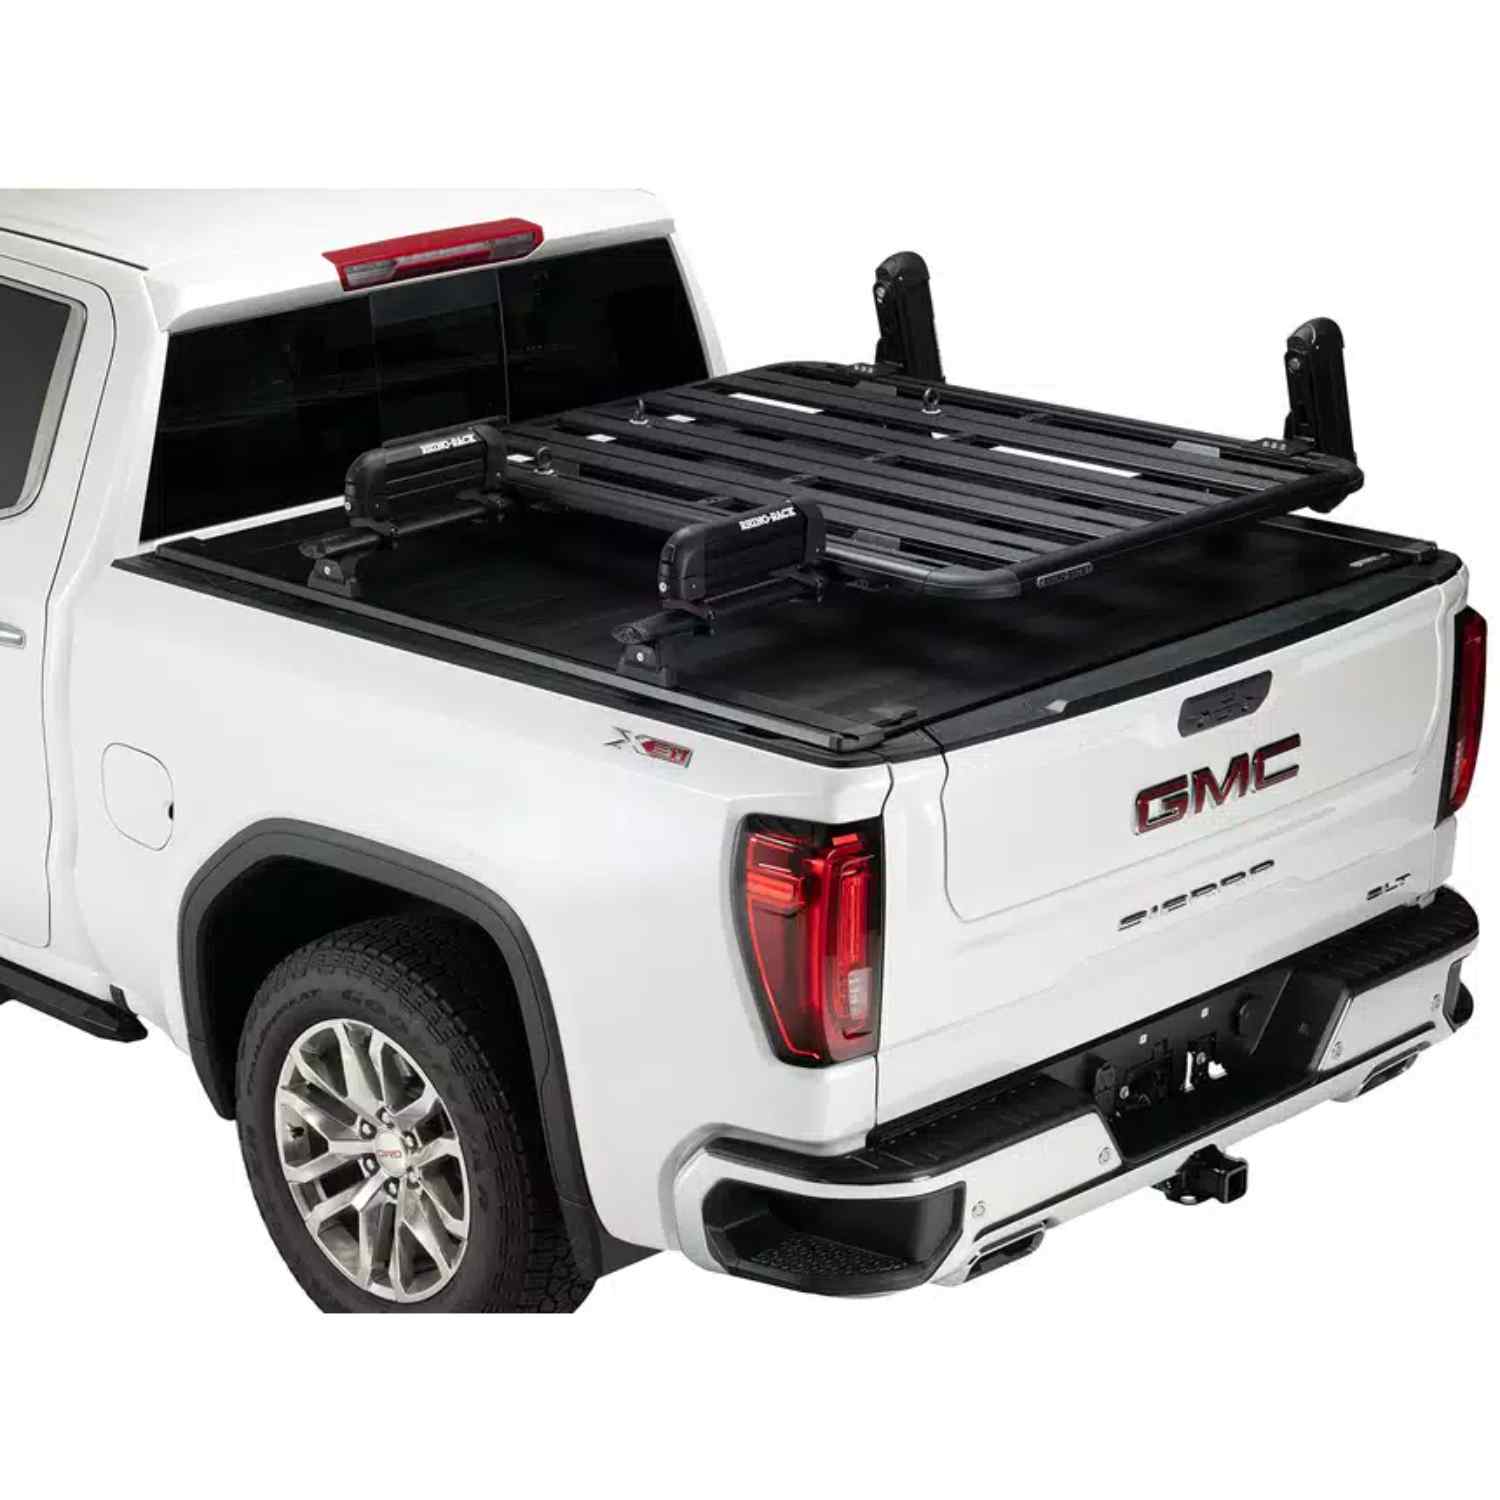 RetraxPRO XR GMC Bed Cover With Corssbars View